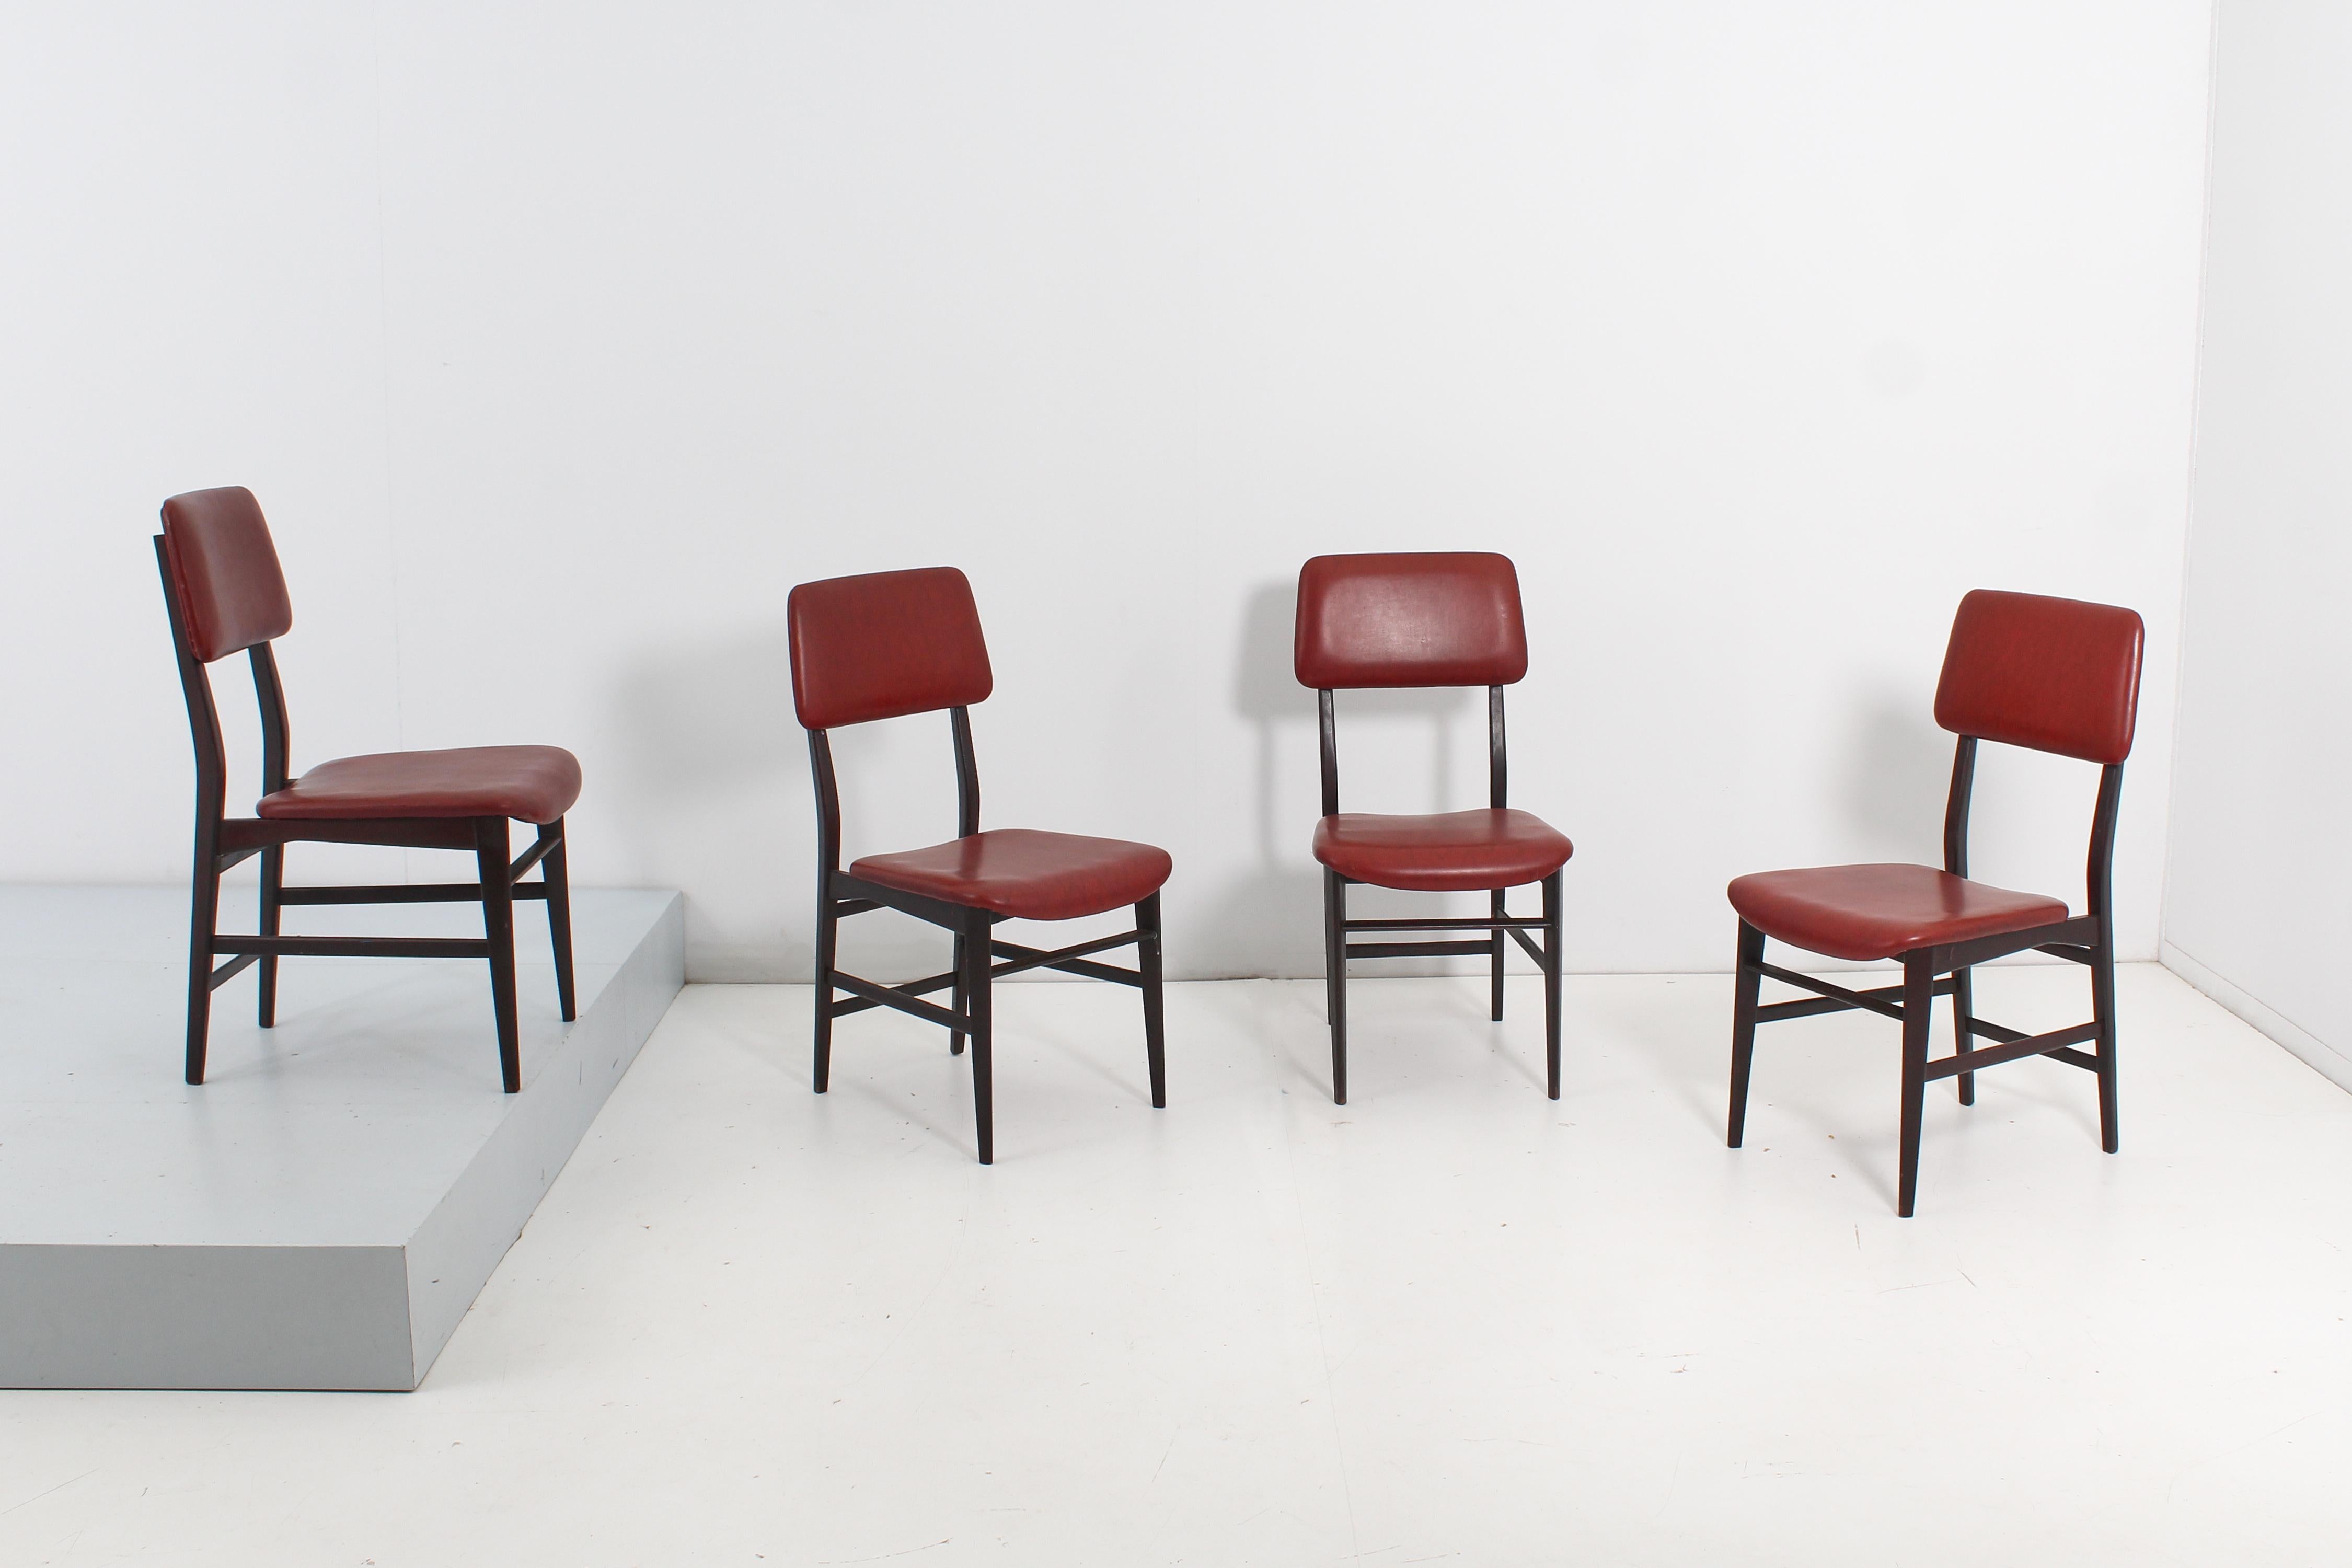 Italian Mid-Century V. Dassi, E. Palutari Set of 4 Wooden Chairs, Italy, 1960s For Sale